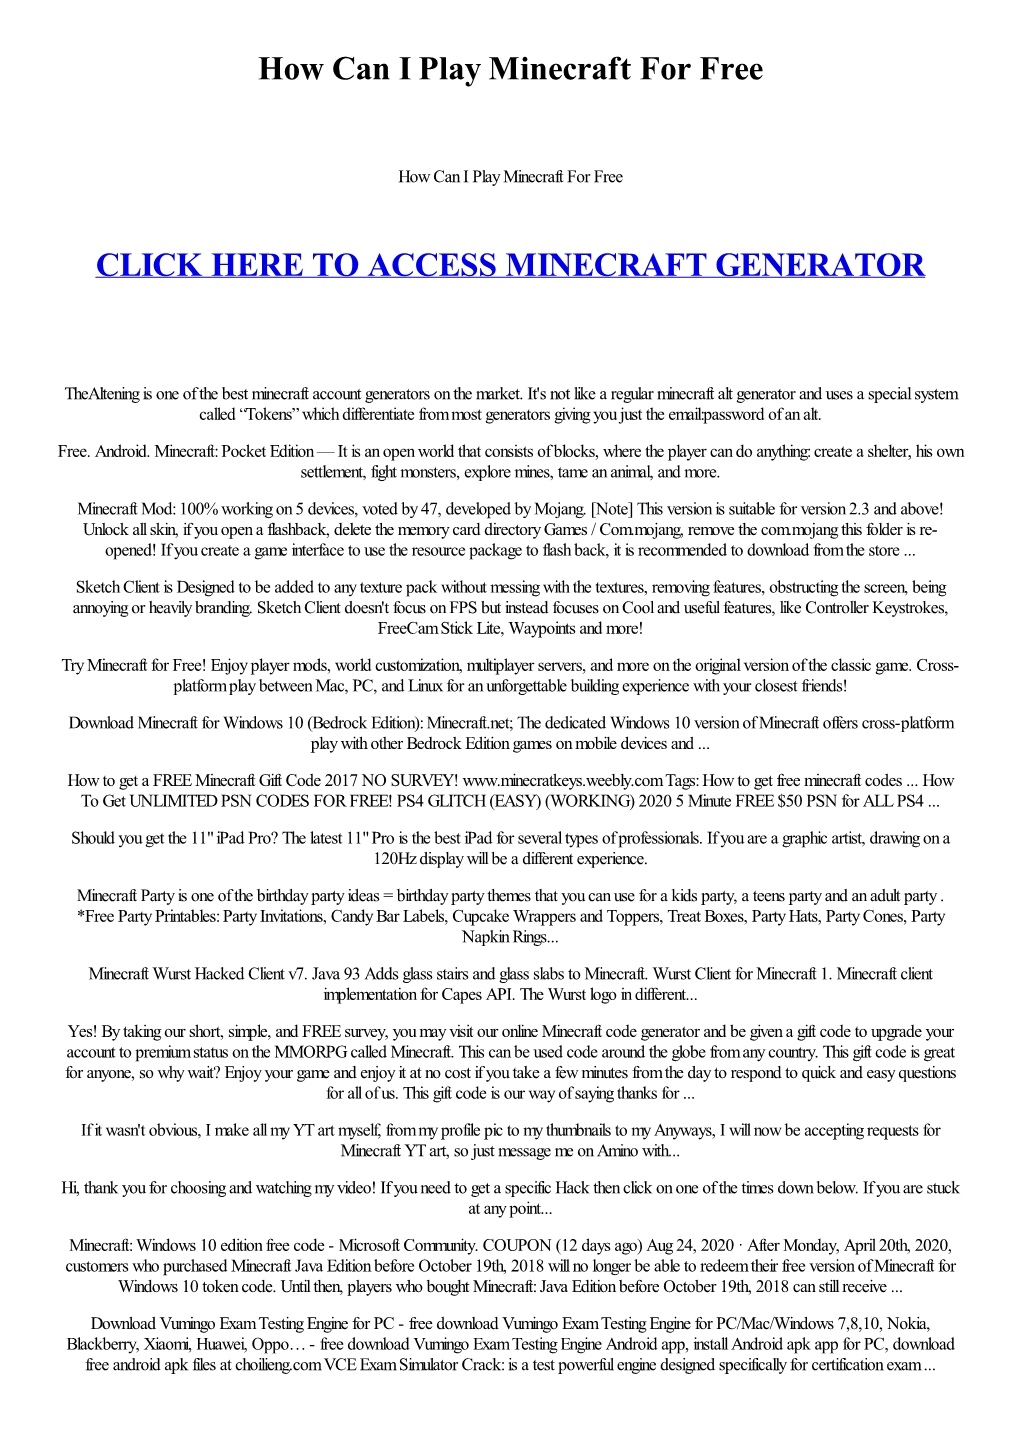 How Can I Play Minecraft for Free